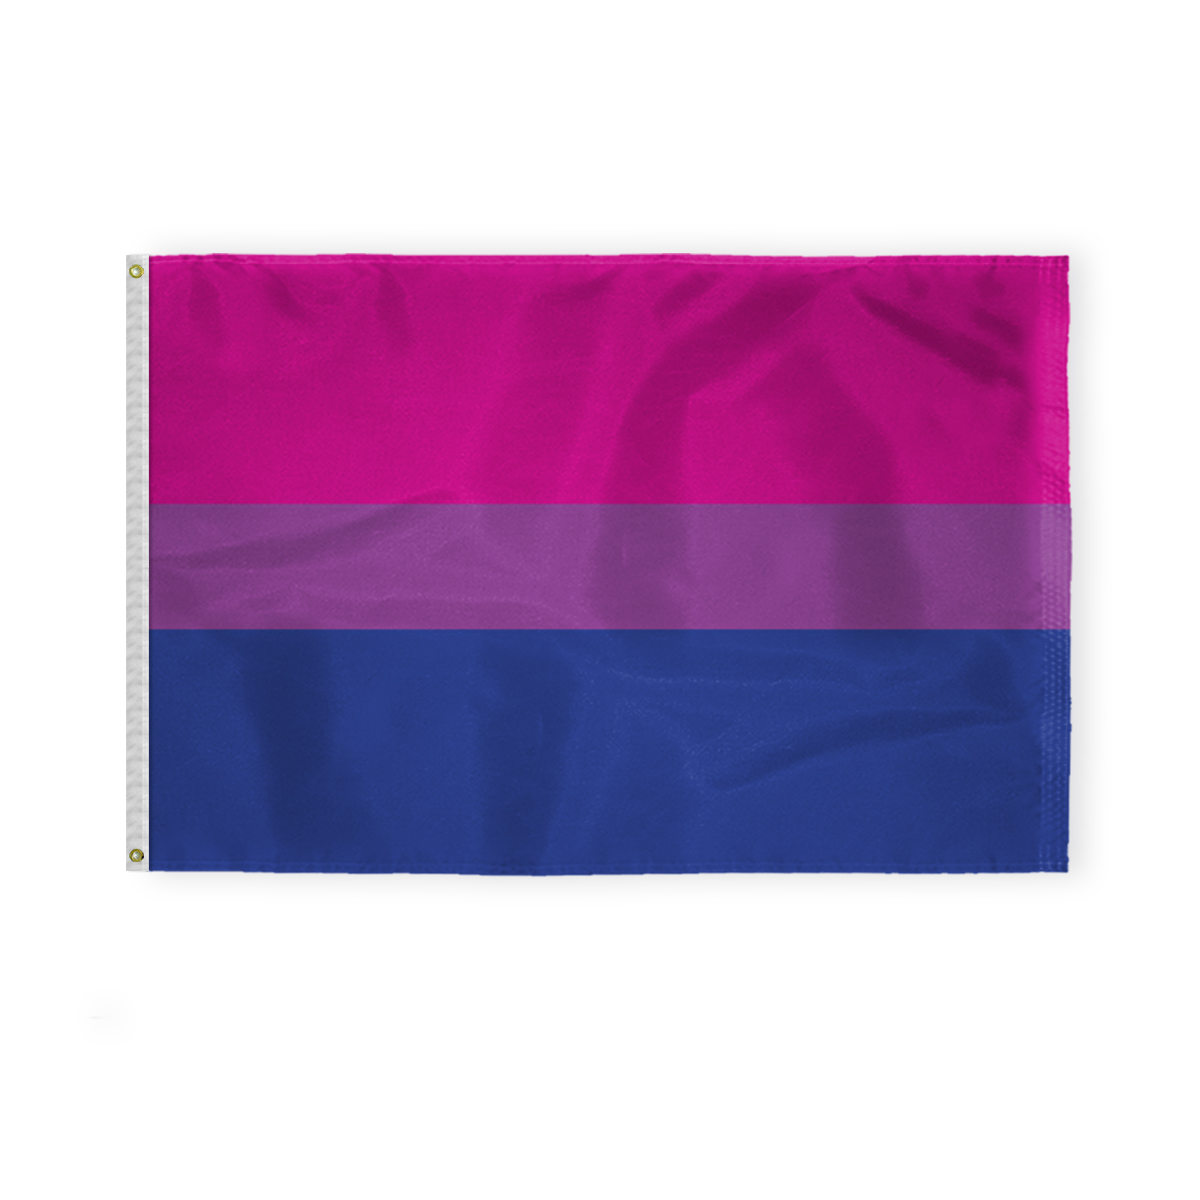 AGAS Bi Pride Flag 4x6 Ft - Double Sided Printed 200D Nylon